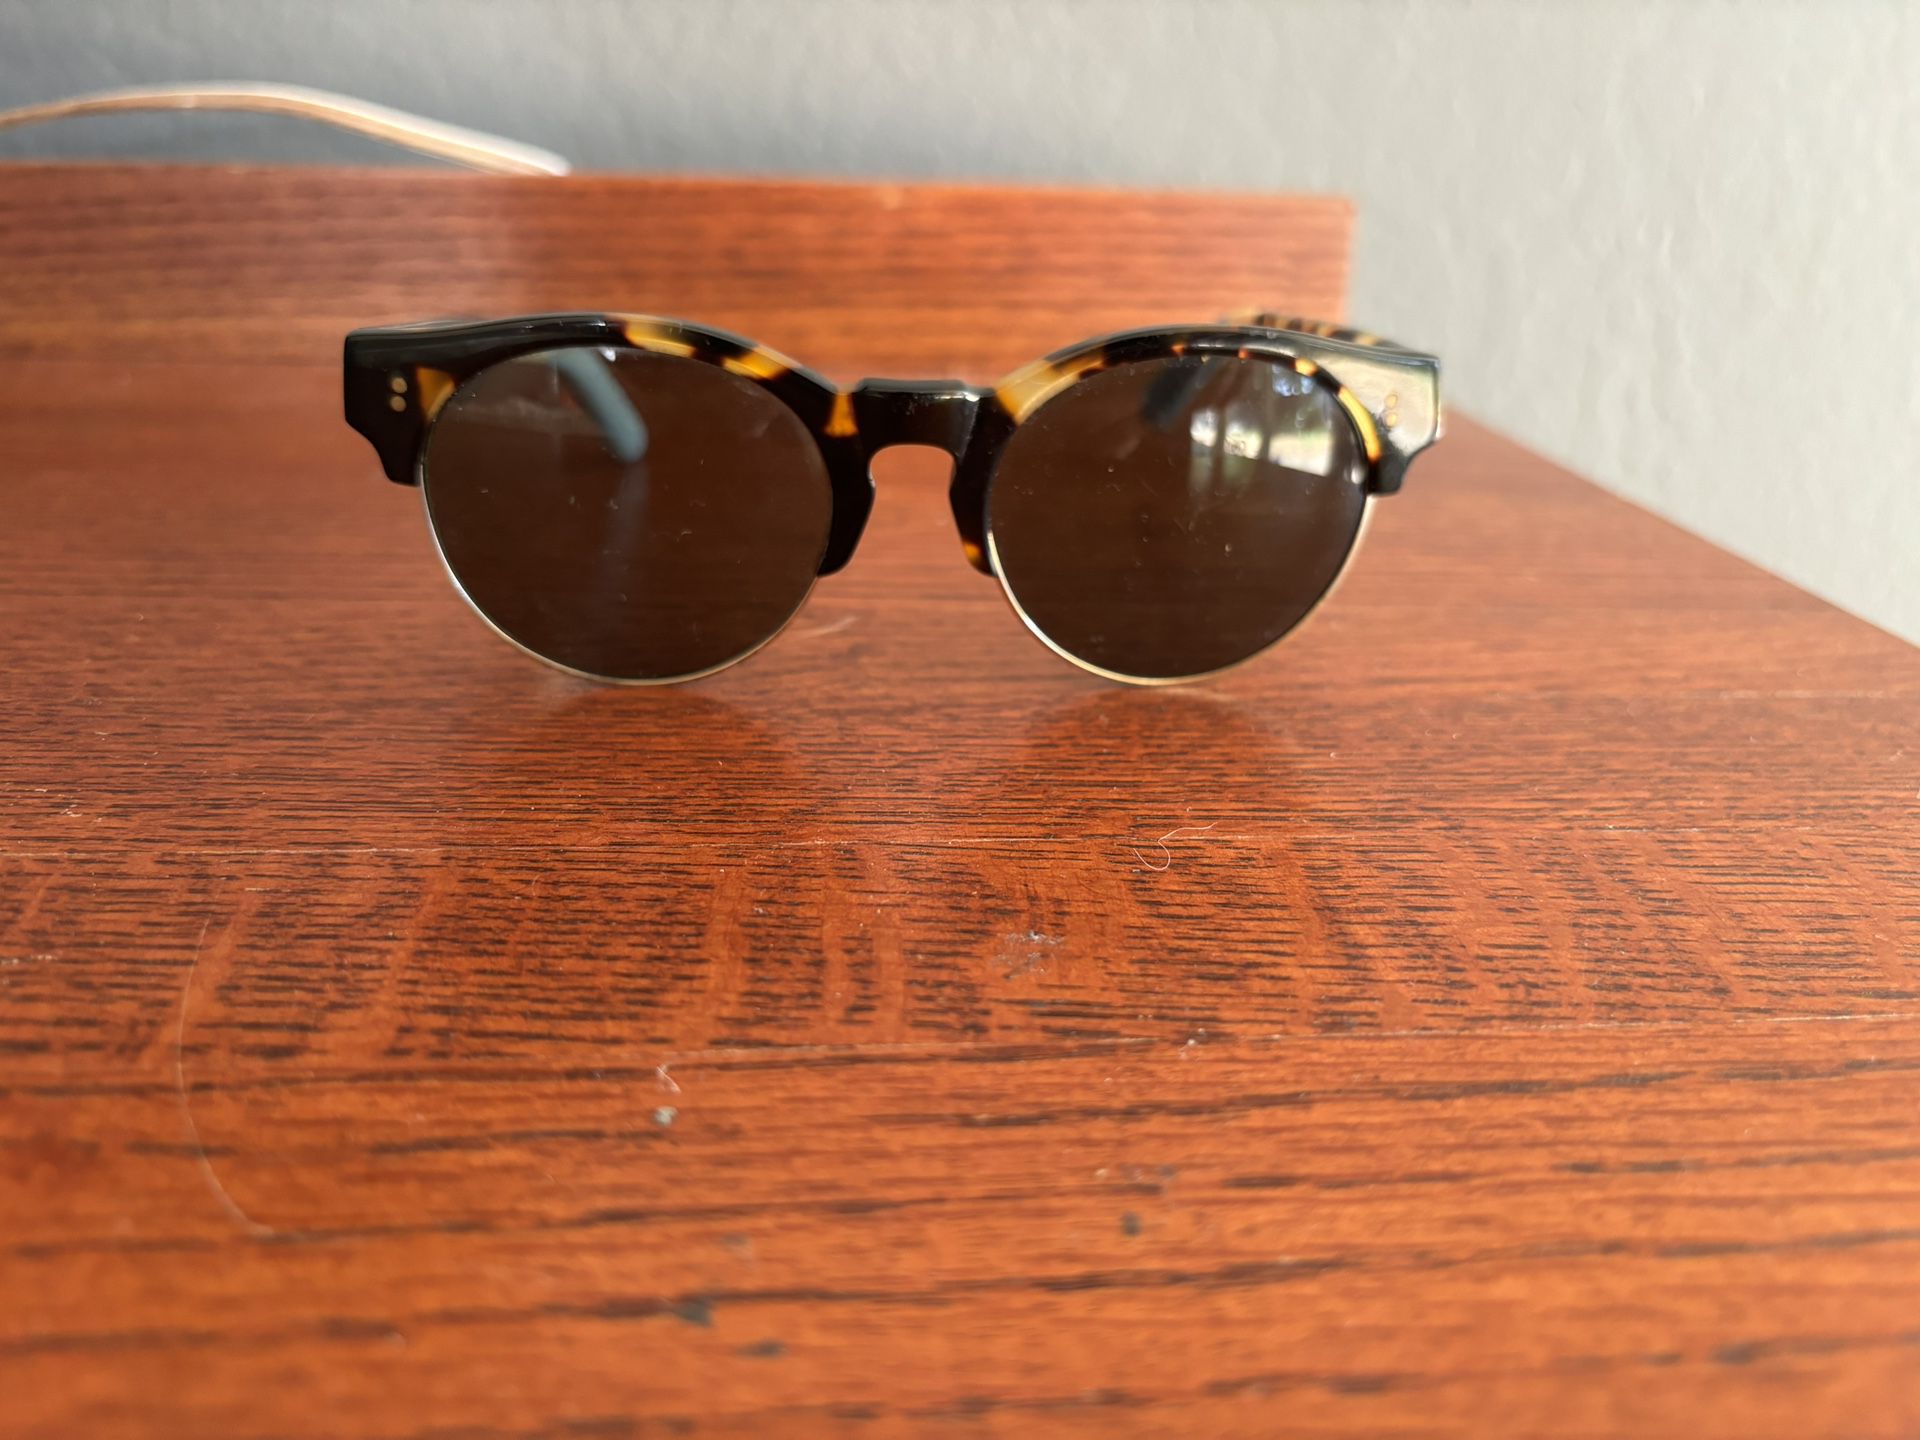 Toms unisex Charlie Rae One For One Sunglasses great condition 